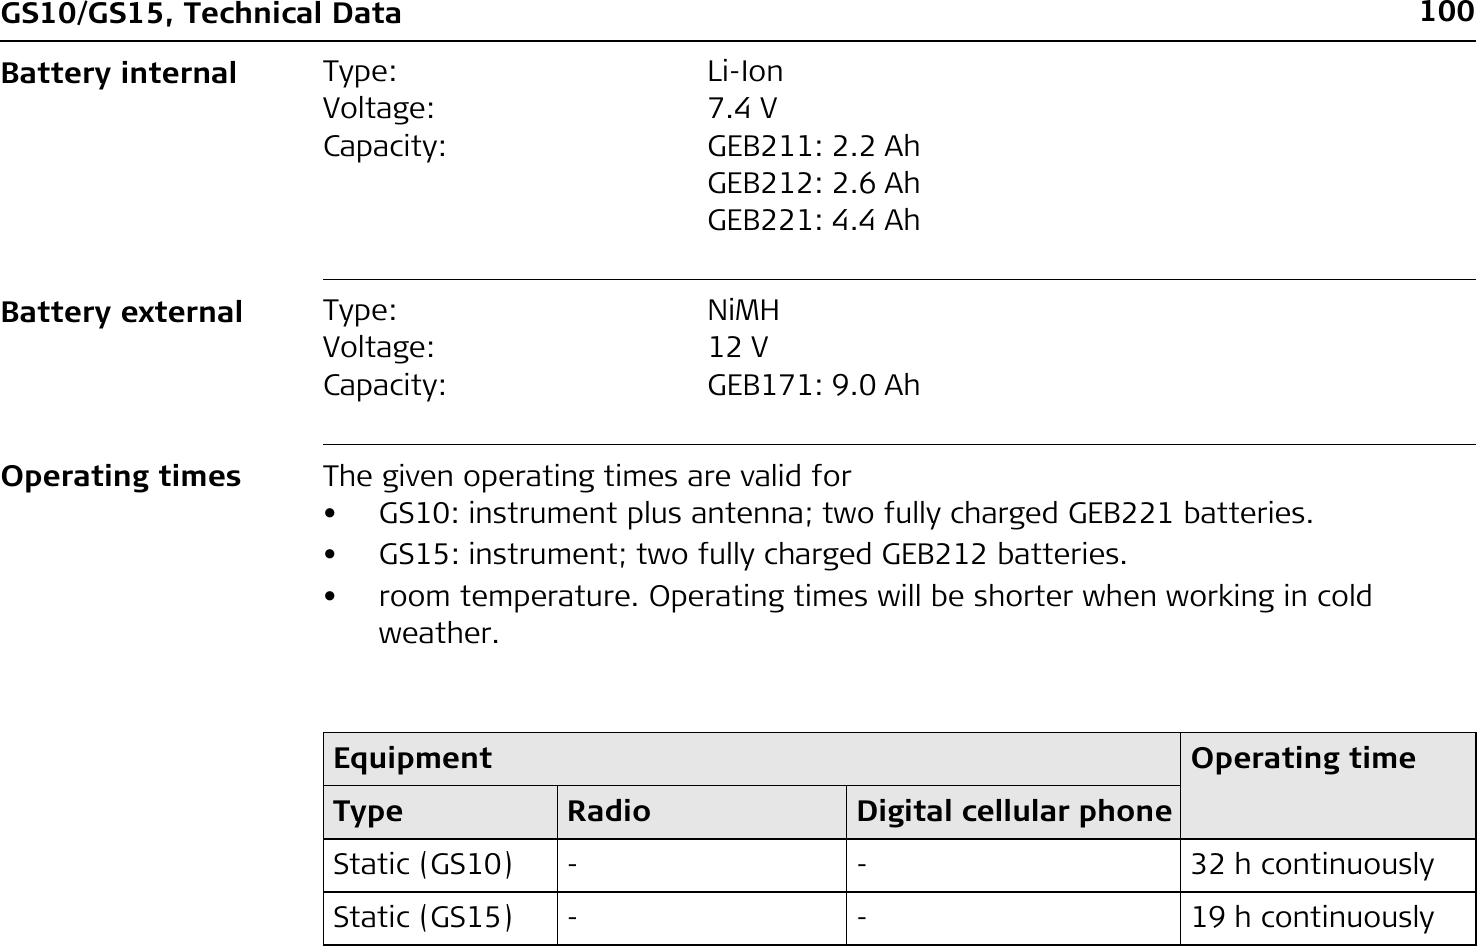 100GS10/GS15, Technical DataBattery internalBattery externalOperating times The given operating times are valid for• GS10: instrument plus antenna; two fully charged GEB221 batteries.• GS15: instrument; two fully charged GEB212 batteries.• room temperature. Operating times will be shorter when working in cold weather.Type: Li-IonVoltage: 7.4 VCapacity: GEB211: 2.2 AhGEB212: 2.6 AhGEB221: 4.4 AhType: NiMHVoltage: 12 VCapacity: GEB171: 9.0 AhEquipment Operating timeType Radio Digital cellular phoneStatic (GS10) - - 32 h continuouslyStatic (GS15) - - 19 h continuously